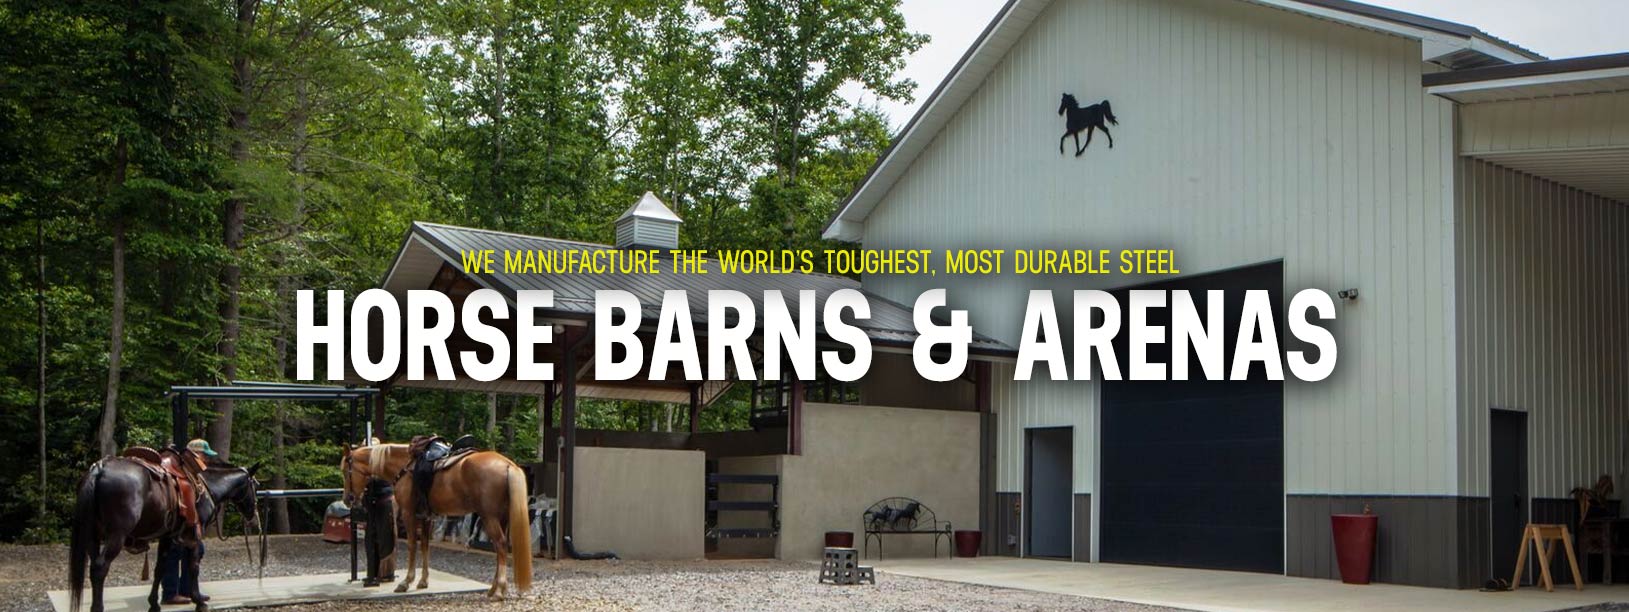 Custom Horse Barns and Horse Arenas from Worldwide Steel Buildings. We can design the perfect horse barn for you out of long-lasting steel that comes with a 50 year warranty. Our kits are engineered to withstand the snow and ice loads of your location and made from the highest quality USA steel.